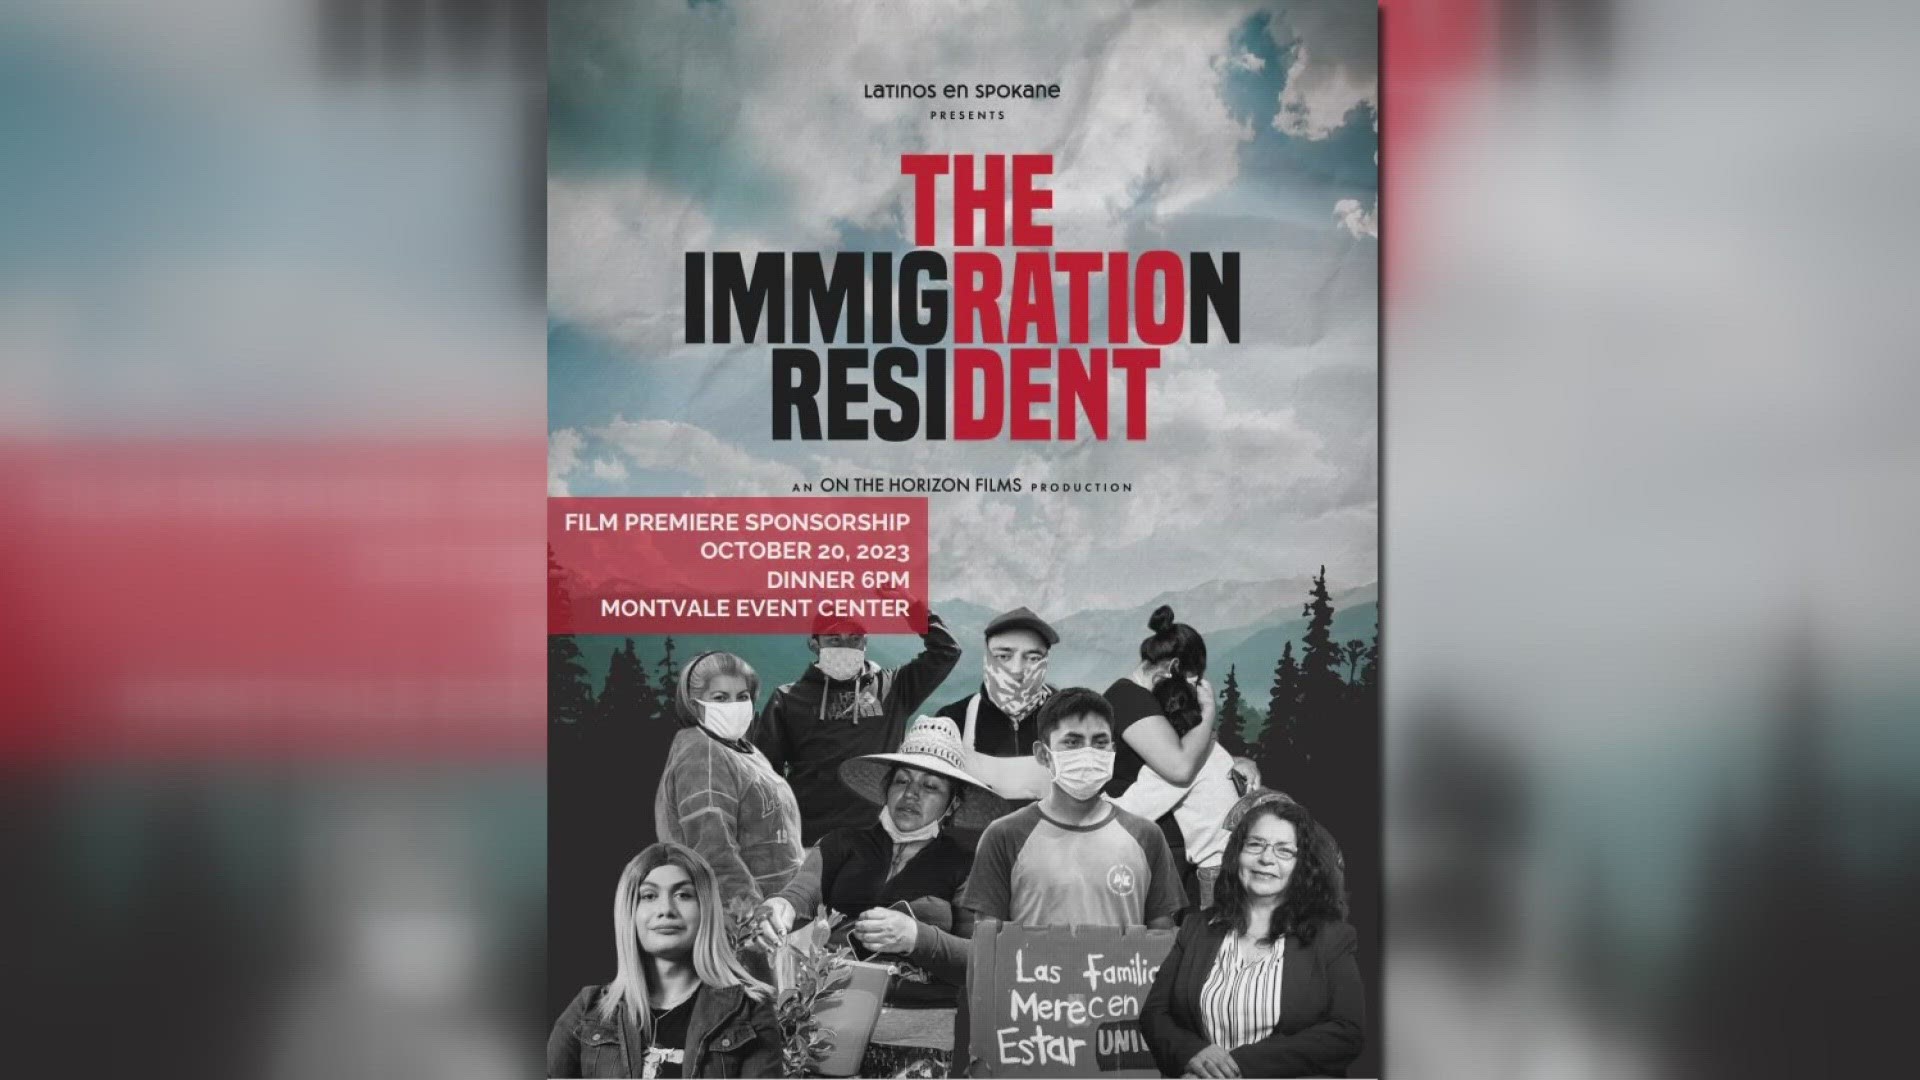 Over the past year, Latinos en Spokane has been working on a new documentary, "The Immigration Resident," highlighting the contributions immigrants have made.